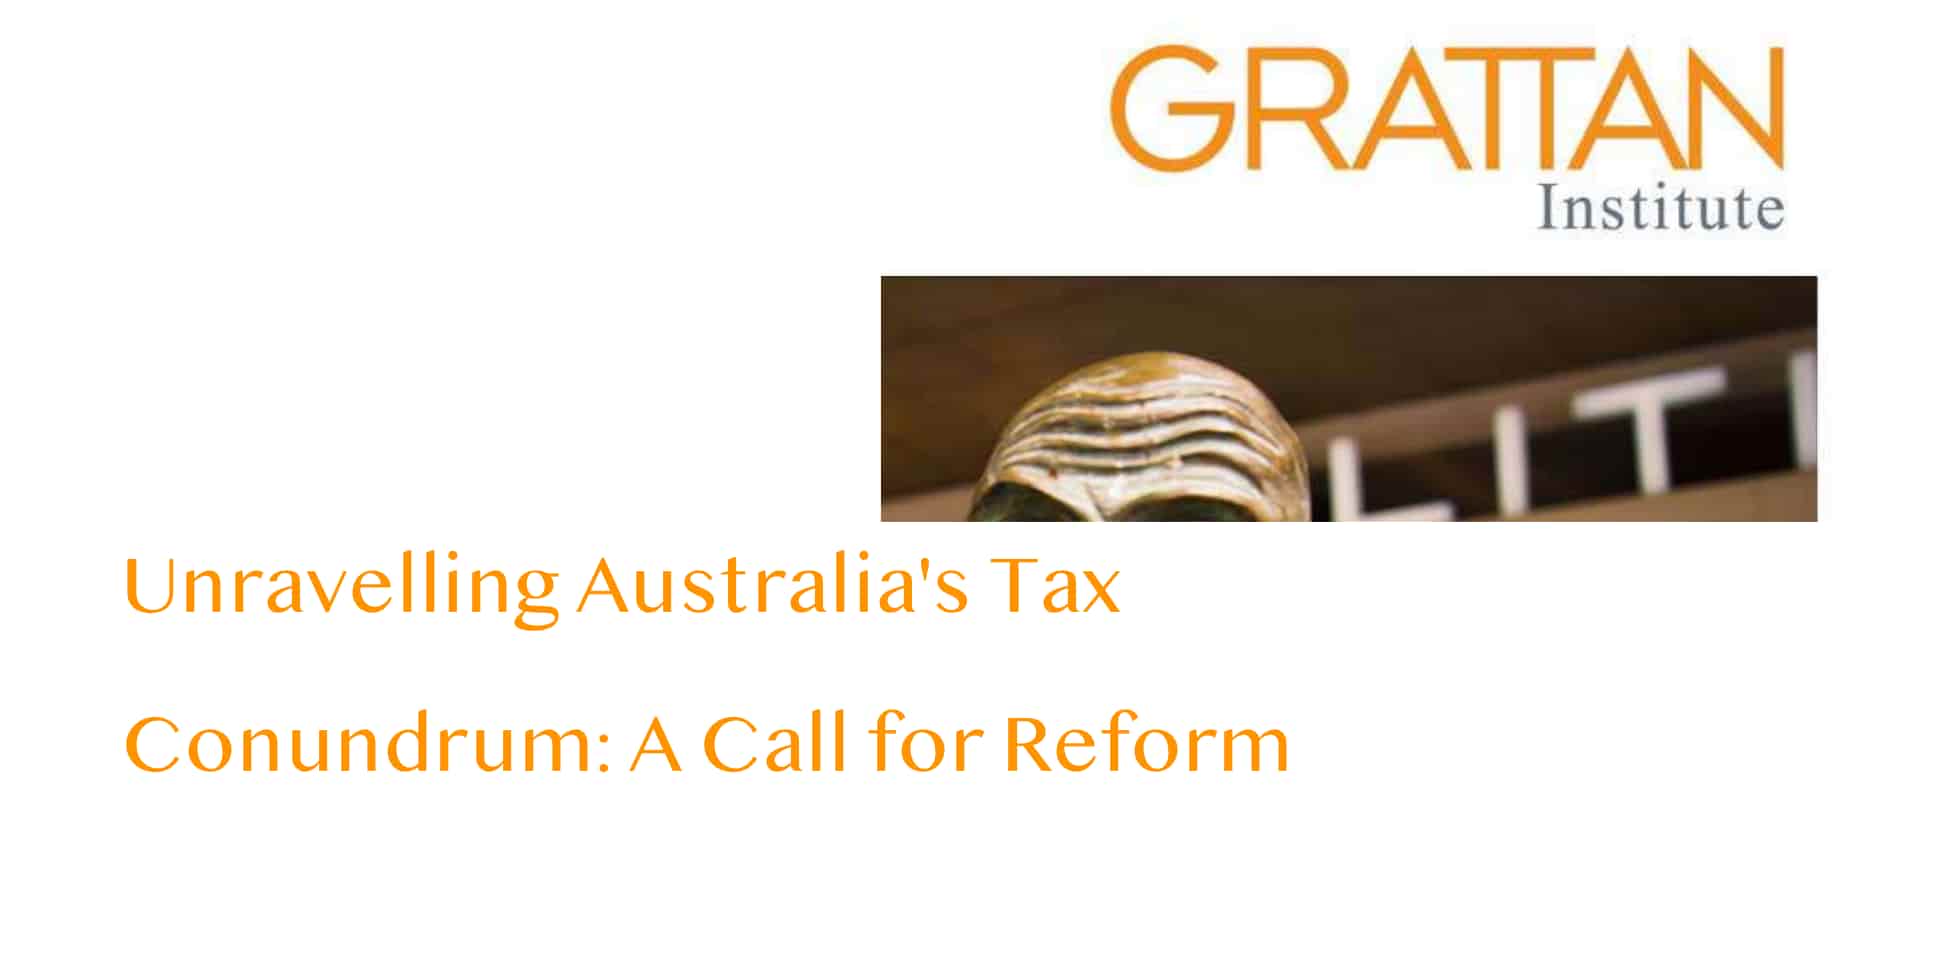 Unravelling Australia’s Tax Conundrum: A Call for Reform